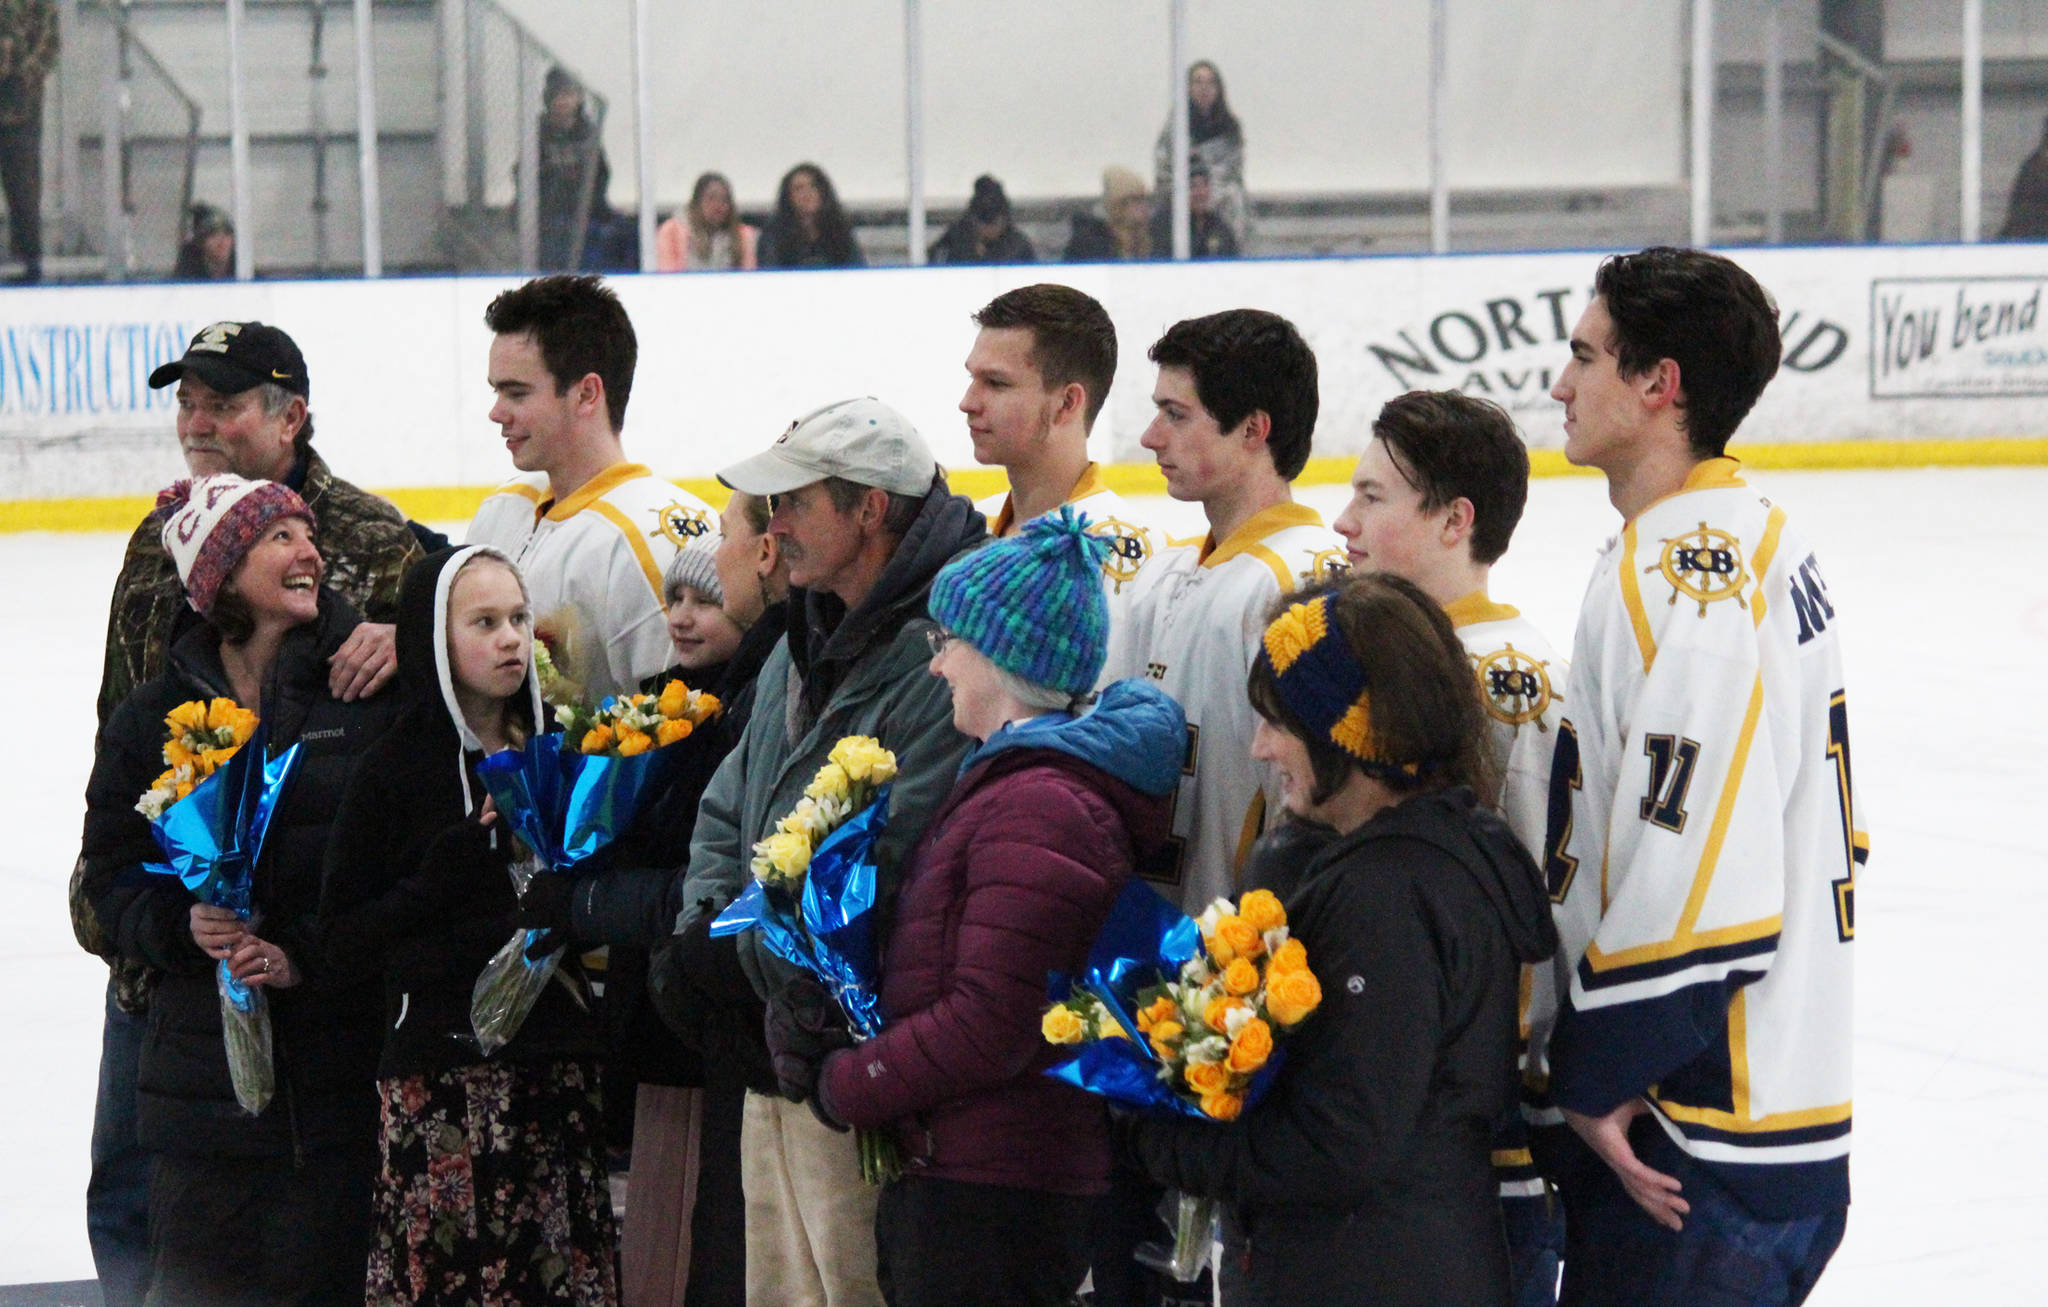 The five seniors on Homer High School’s hockey team, Spencer Warren, Dimitry Kuzmin, Douglas Dean, Tim Blakely and Charlie Menke, pose with their parents during a senior night ceremony at their last home game of the season Thursday, Jan. 25, 2018 at the Kevin Bell Arena in Homer, Alaska. (Photo by Megan Pacer/Homer News)